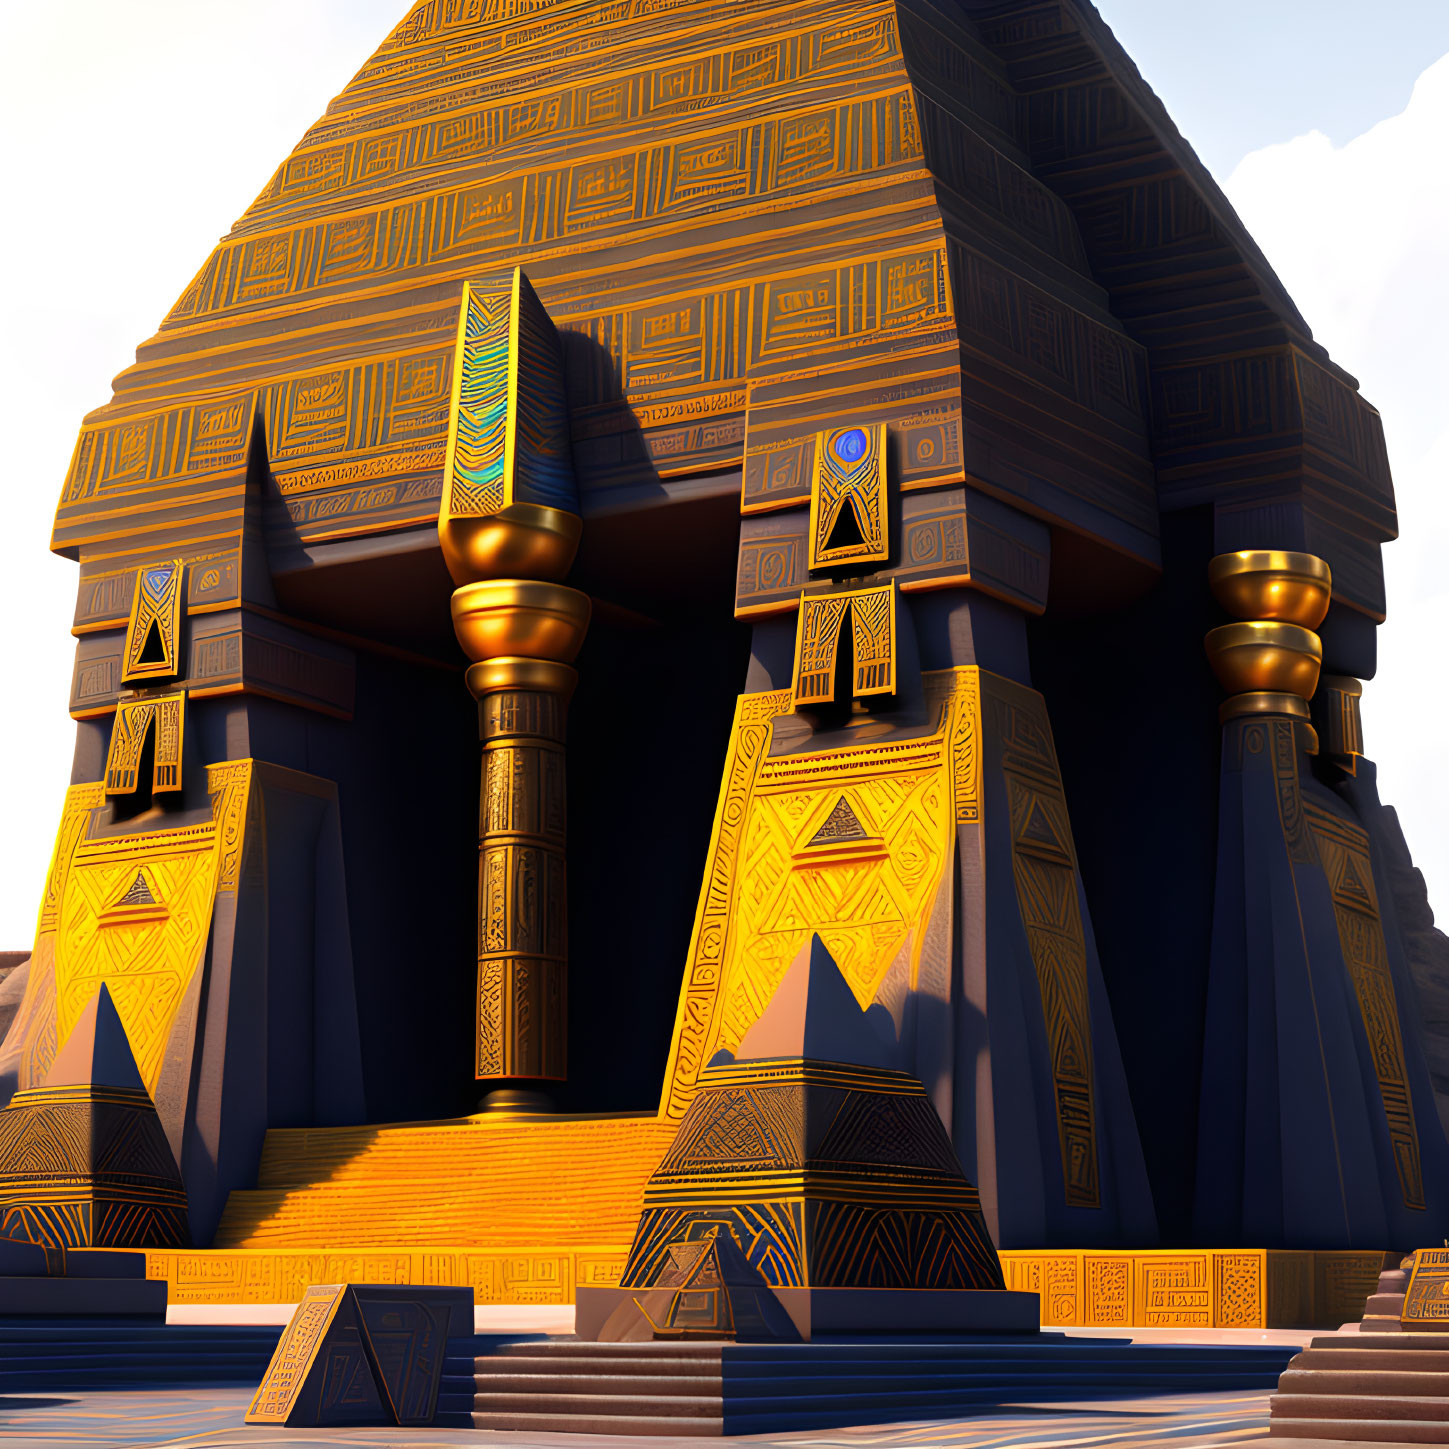 Digital illustration of Egyptian-like temple with ornate columns & hieroglyph patterns in warm ambiance